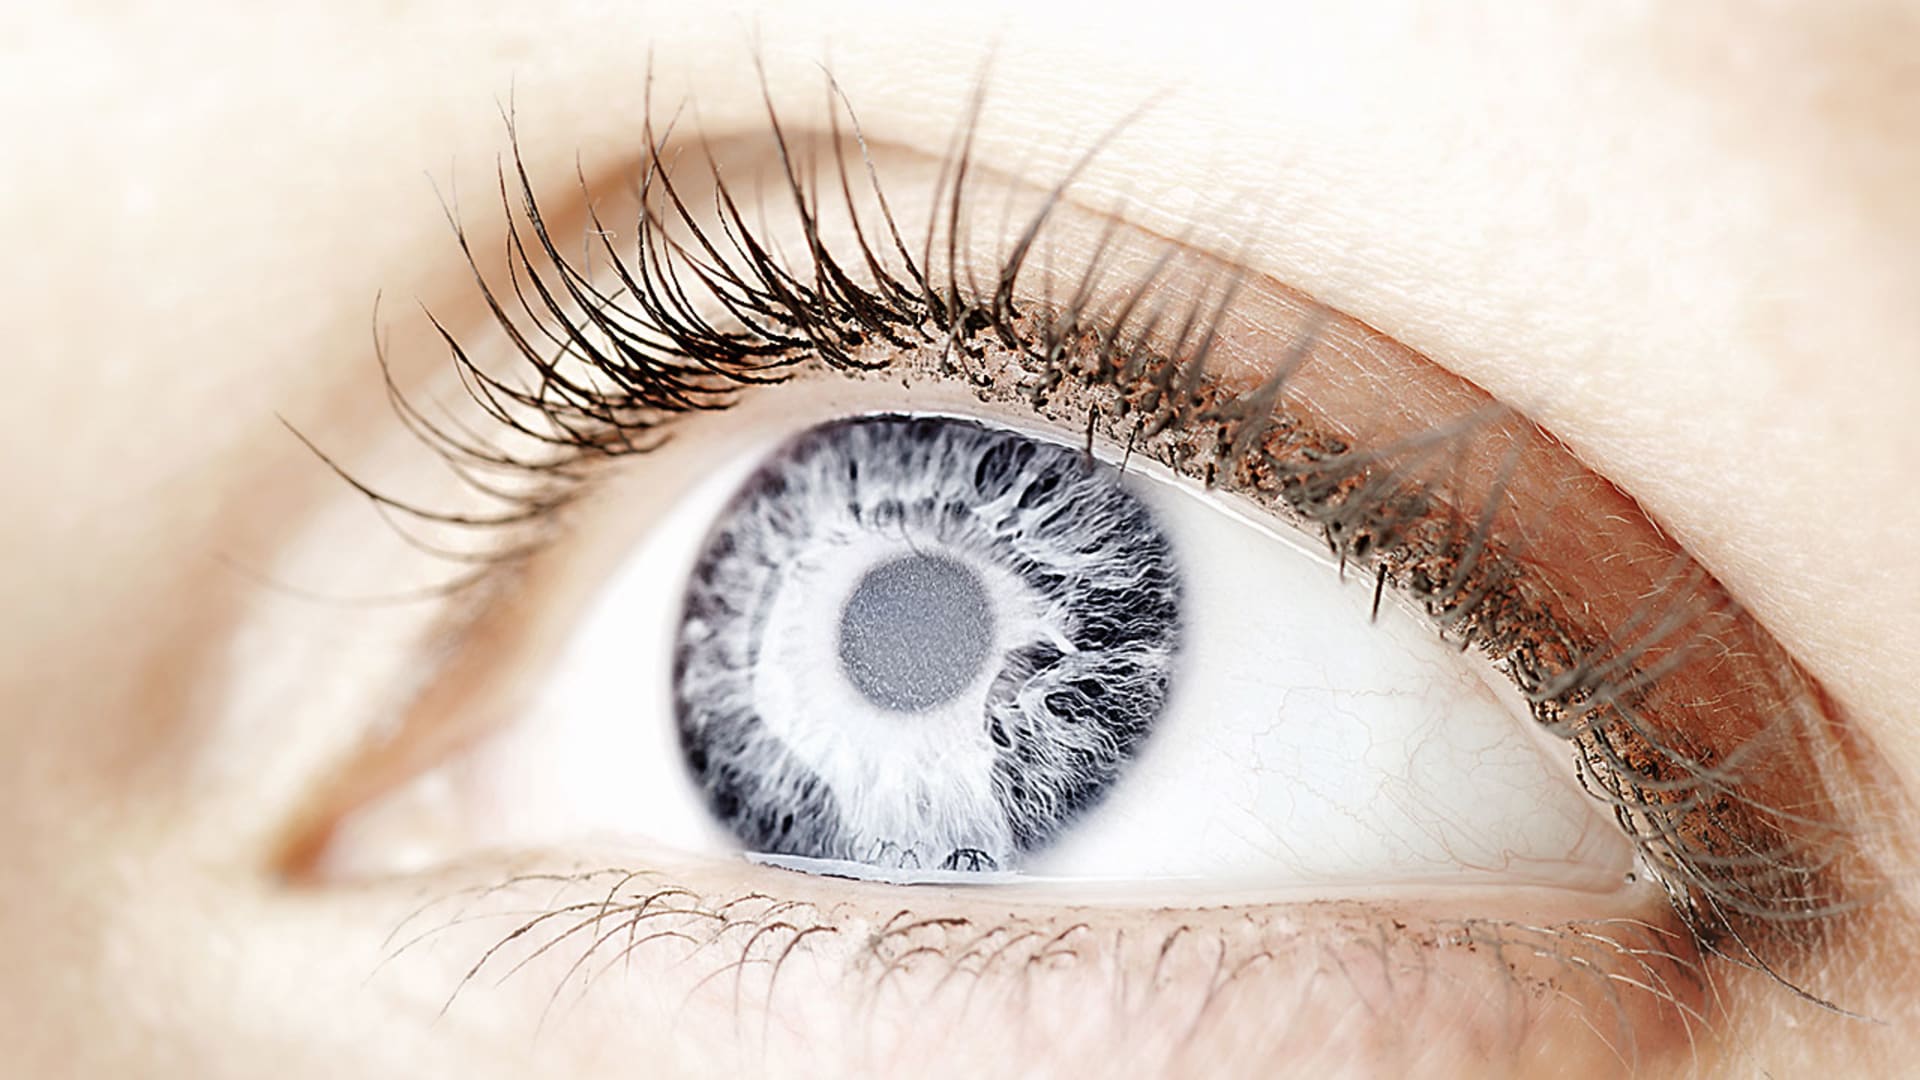 Researchers Have A Vision: Cure Blindness By Regrowing Retinas And Optic Nerves